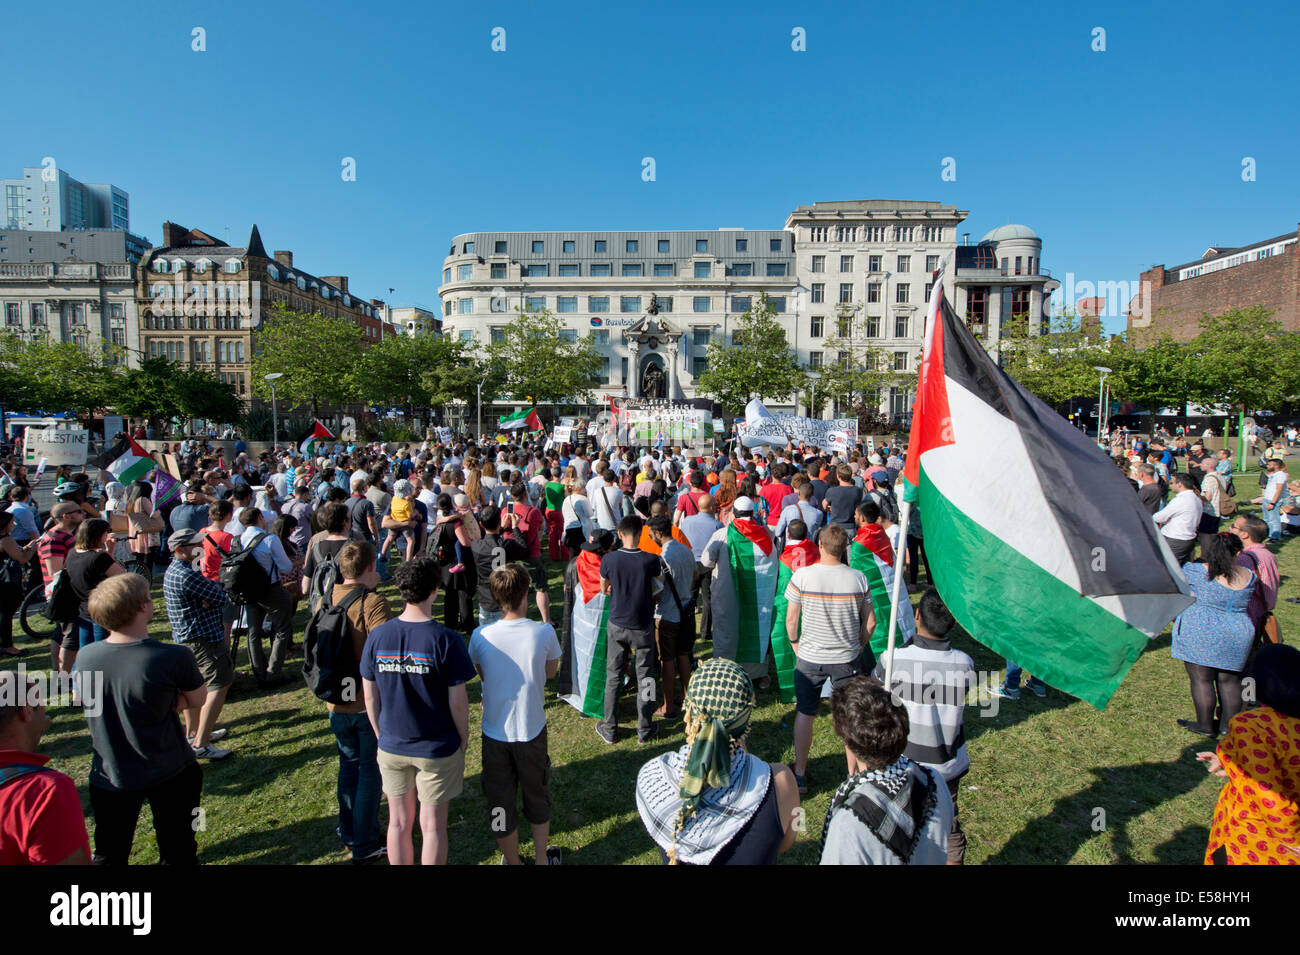 Manchester, UK. 23rd July, 2014. Hundreds of people attend a demonstration in the Piccadilly Gardens area of Manchester to protest over Israel's military actions in the Gaza Strip. Israel's actions have also been condemned by UN human rights official, Navi Pillay. Credit:  Russell Hart/Alamy Live News. Stock Photo